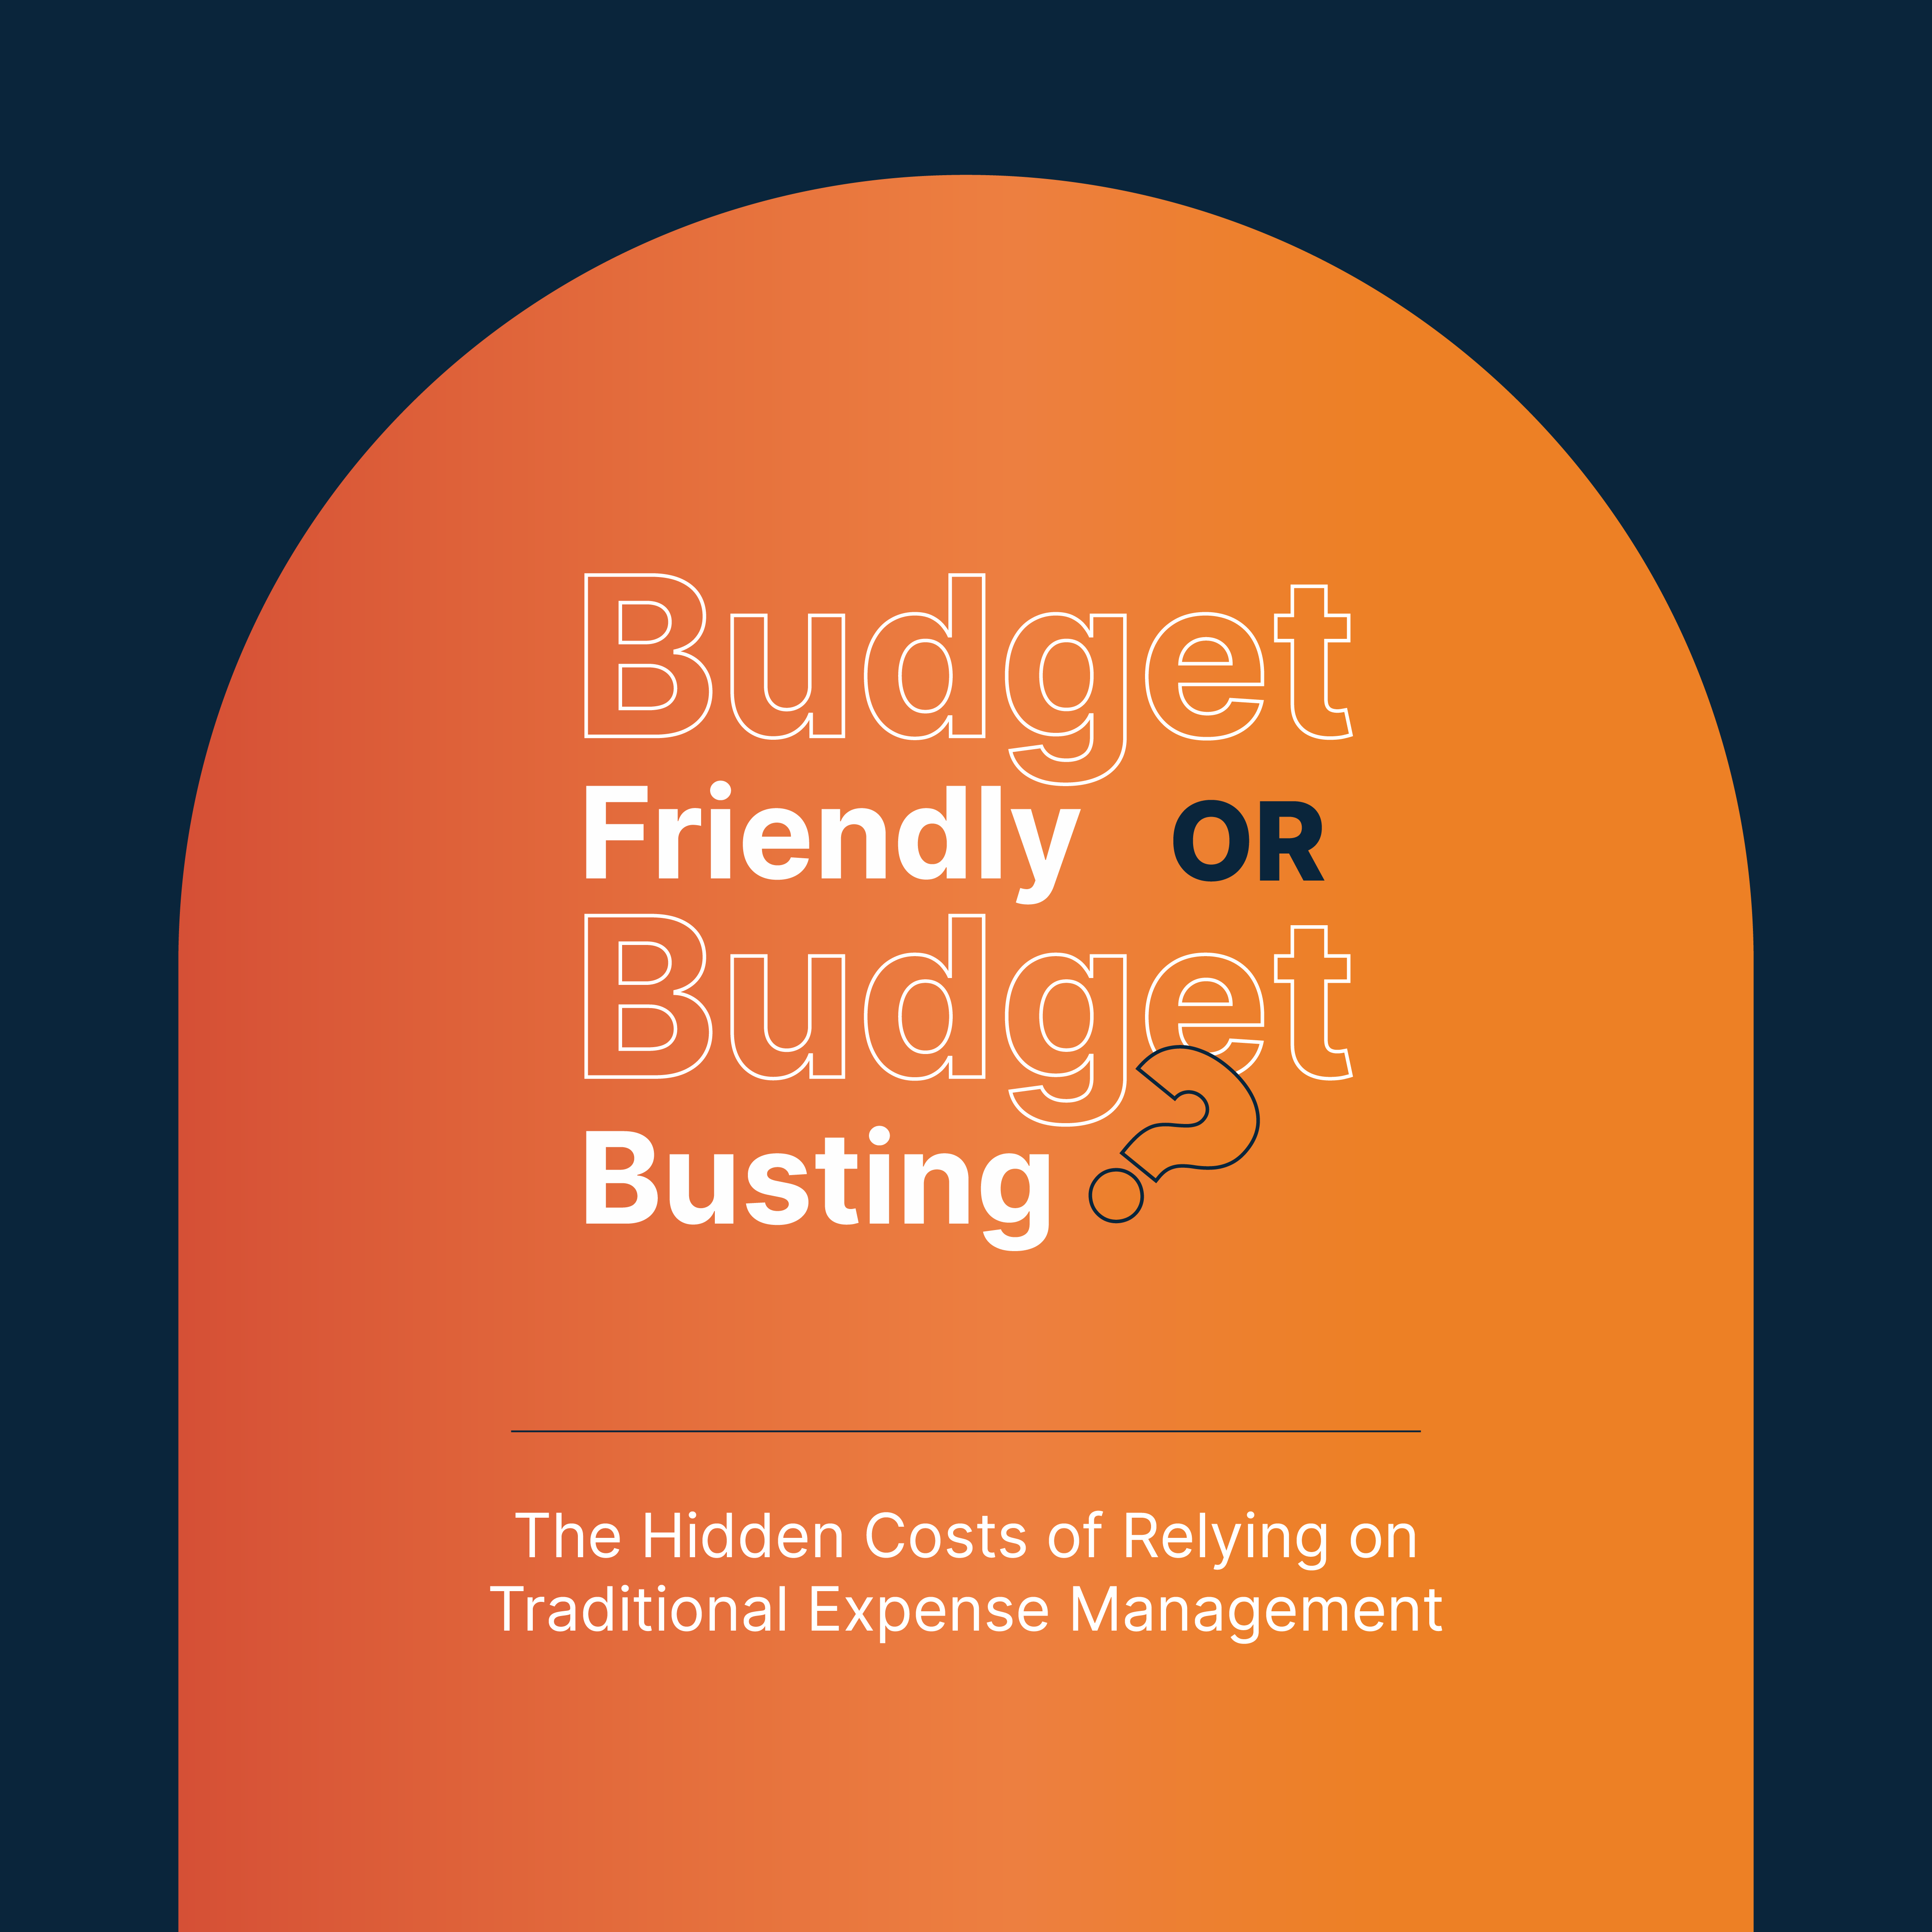 The Hidden Costs of Relying on Traditional Expense Management